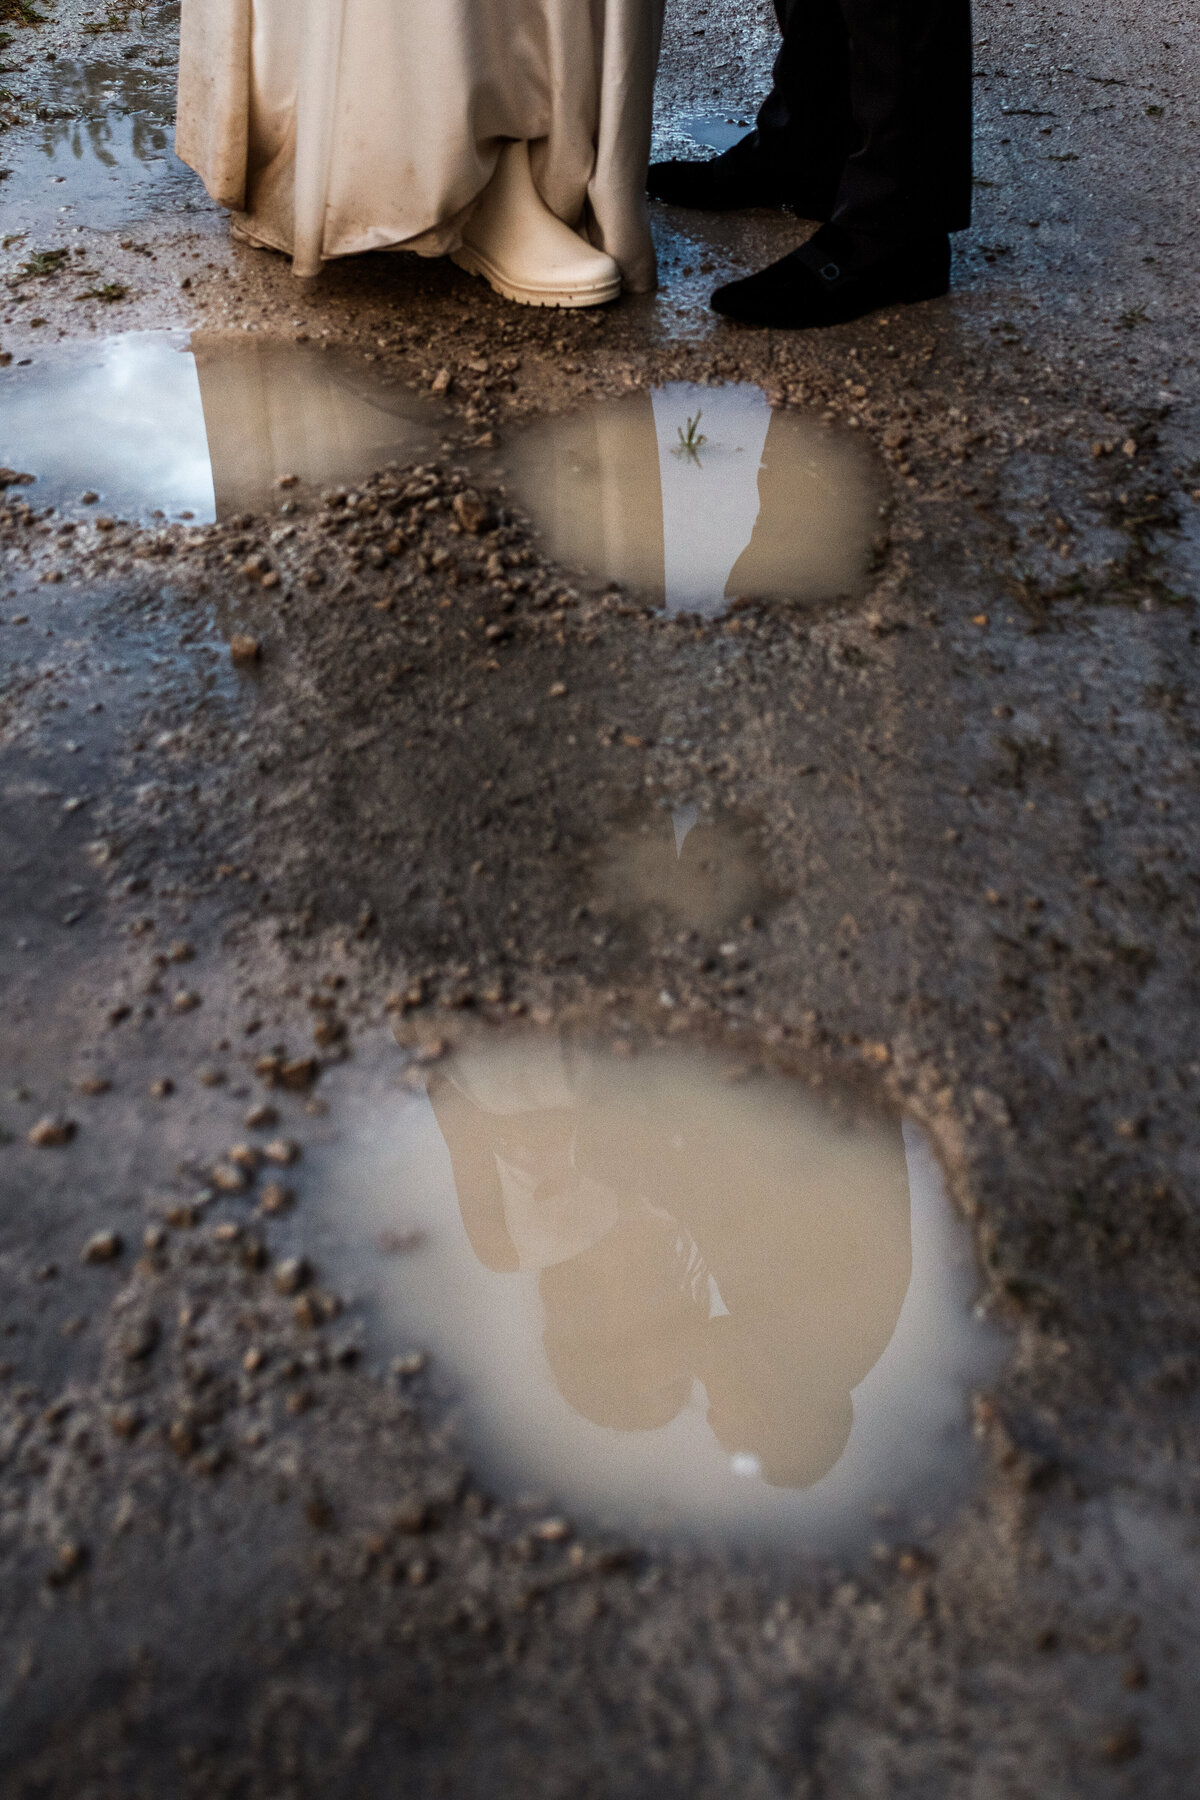 Newlyweds reflecting on a muddy puddle on the dirt road